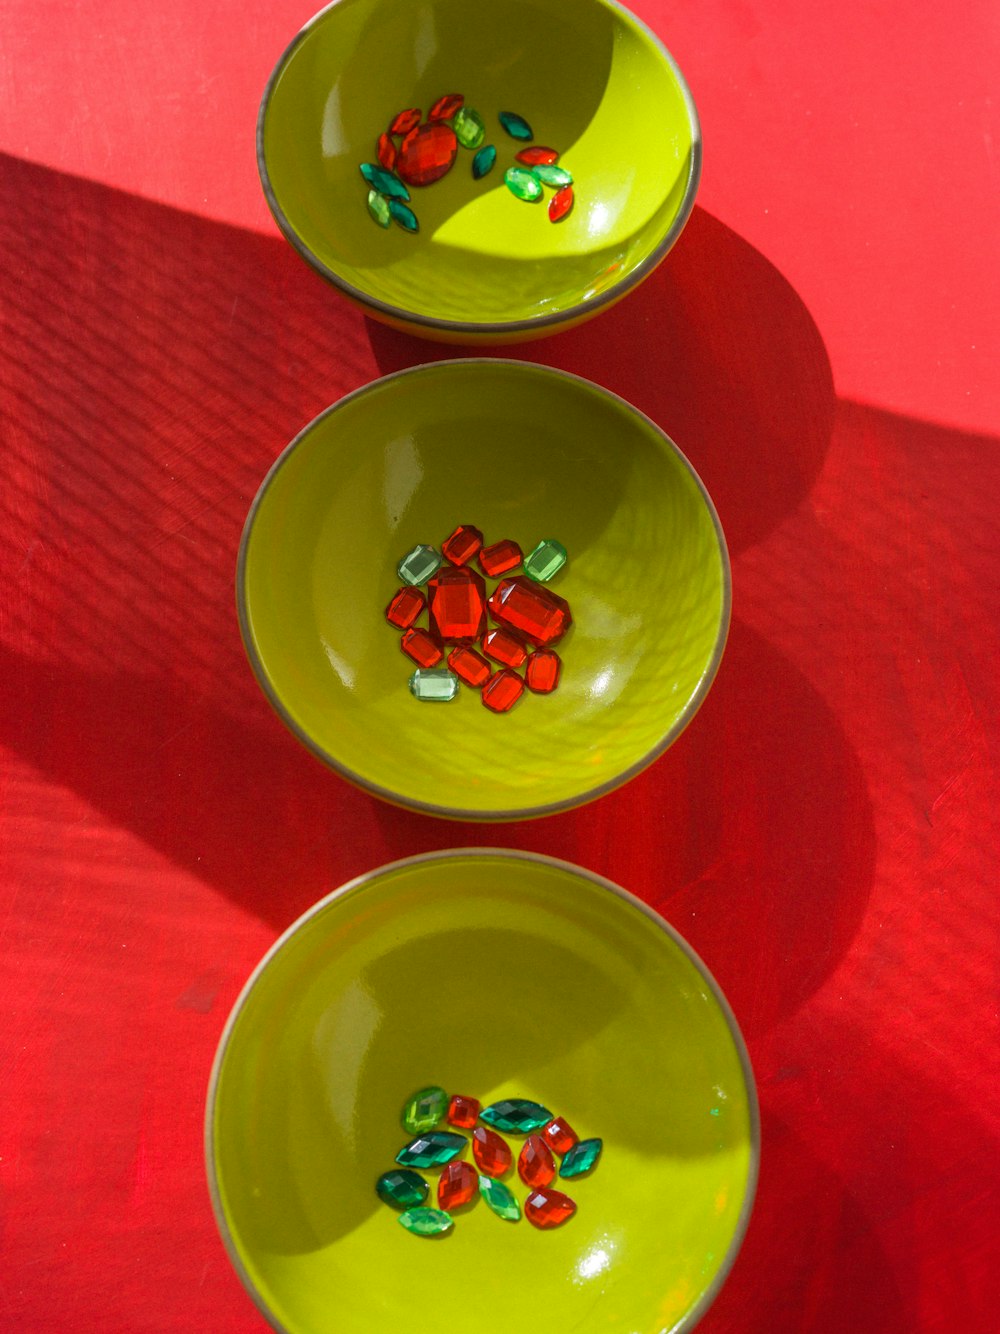 three yellow bowls with candy in them on a red table